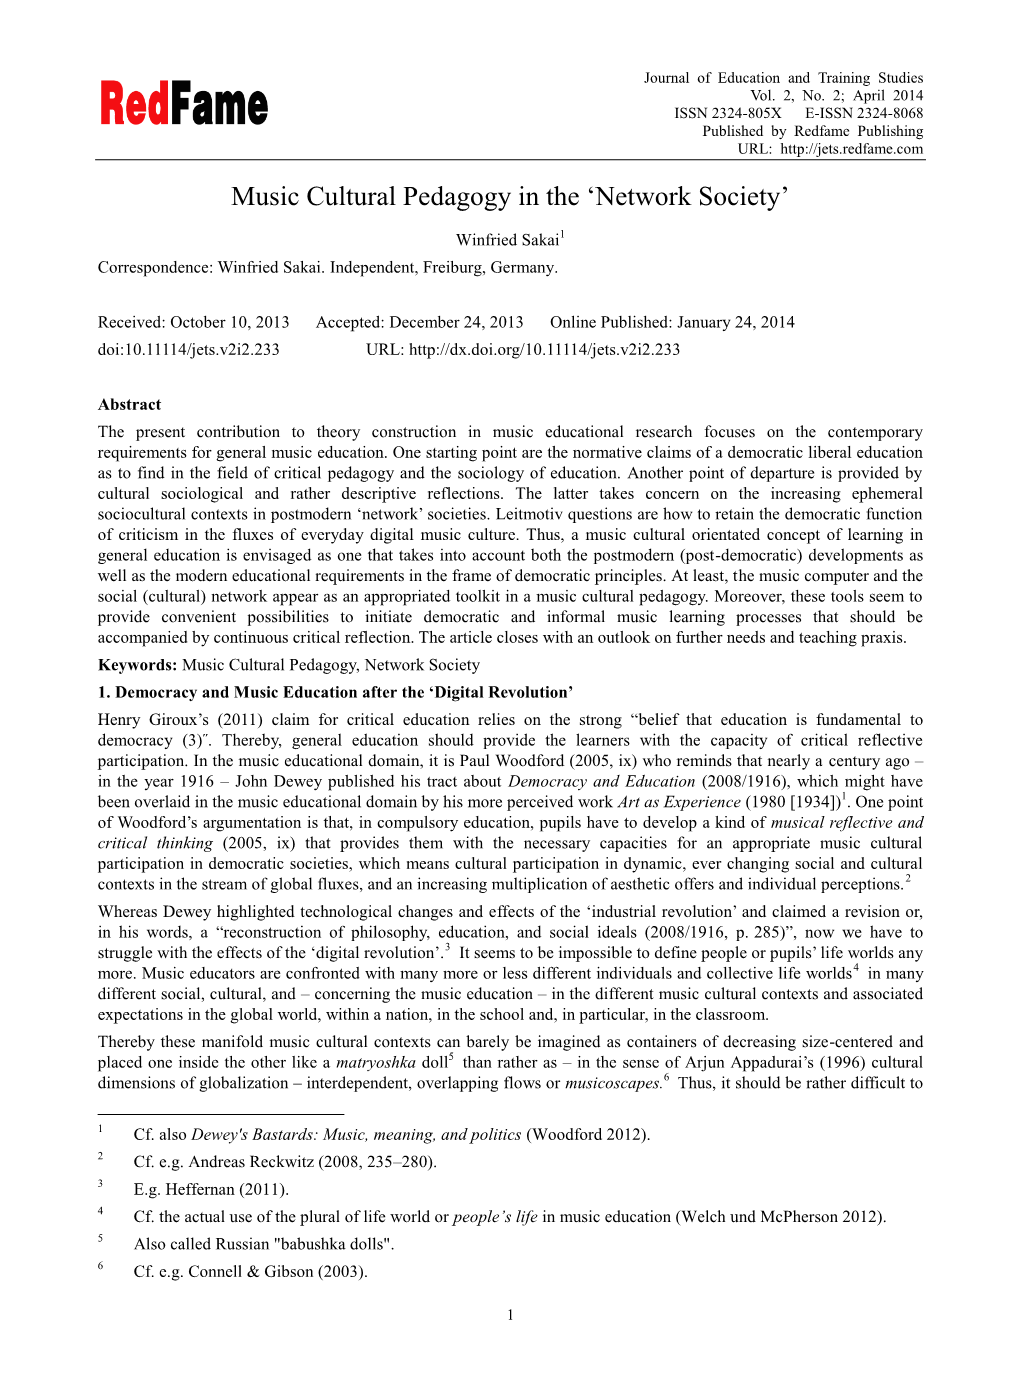 Music Cultural Pedagogy in the ‗Network Society'